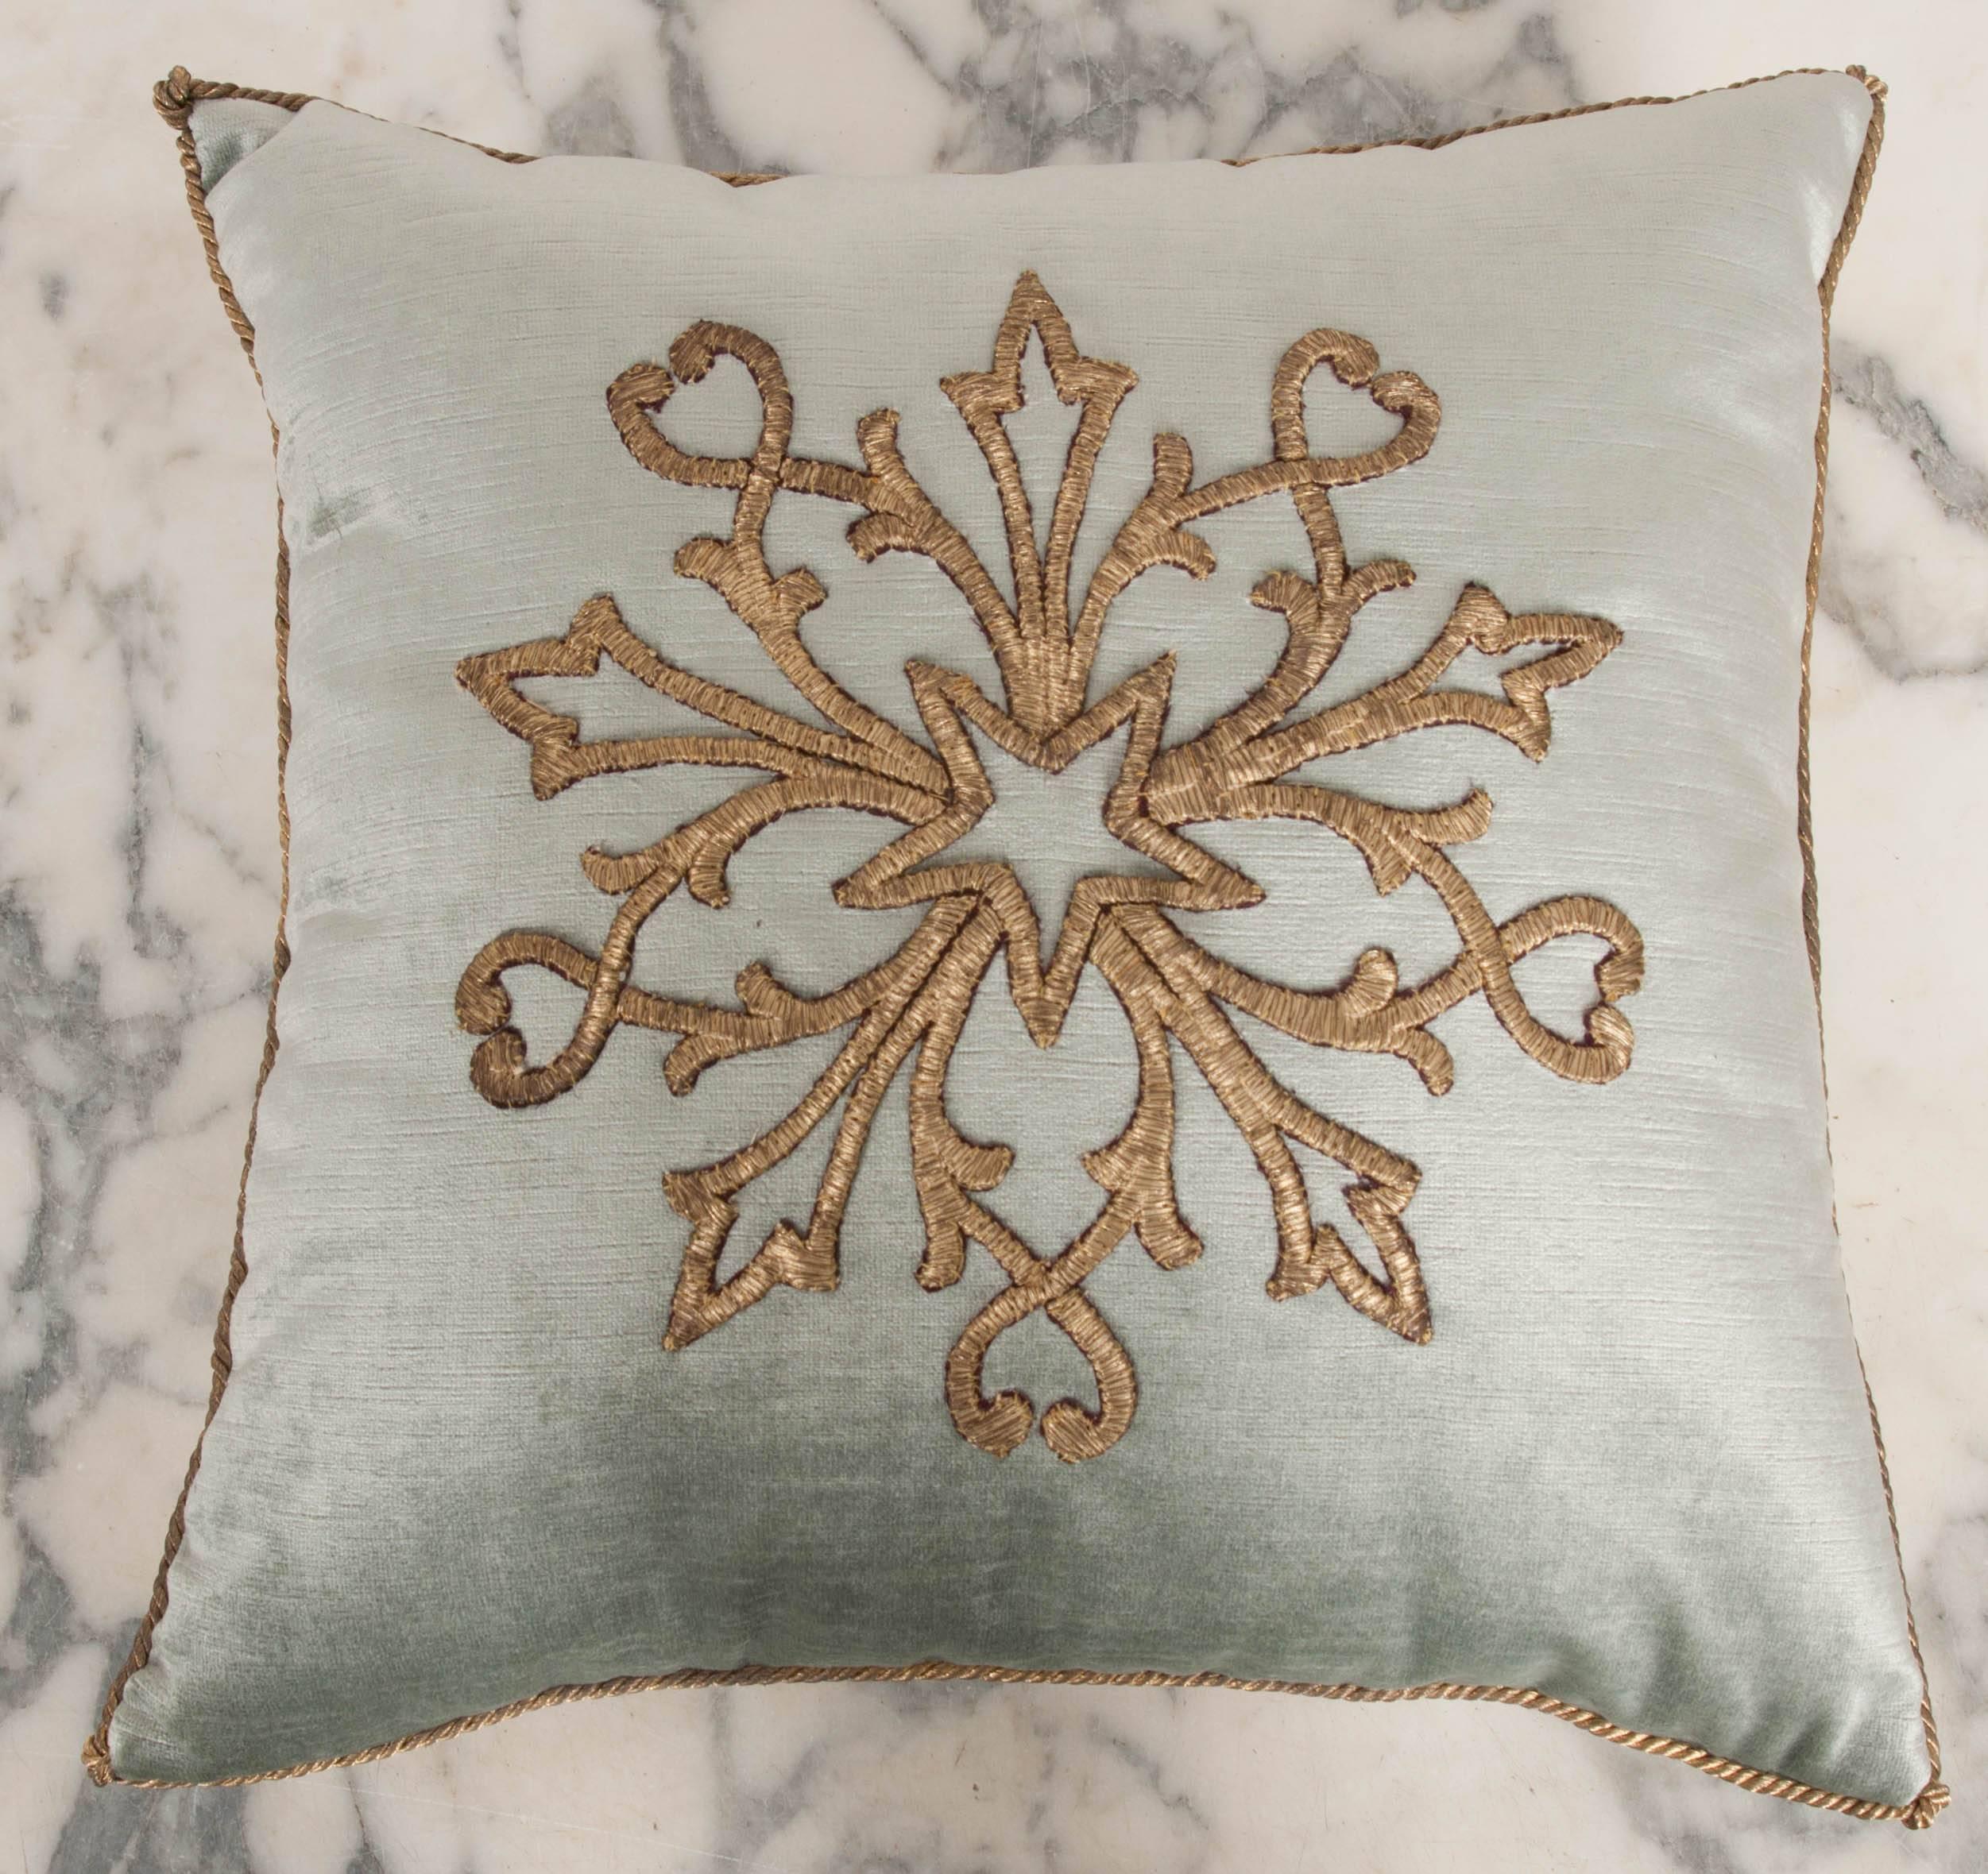 Antique Ottoman Empire raised gold metallic embroidery of a star with scrollwork on pale French blue velvet. Hand trimmed with vintage gold metallic cording knotted in the corners. Down filled.



